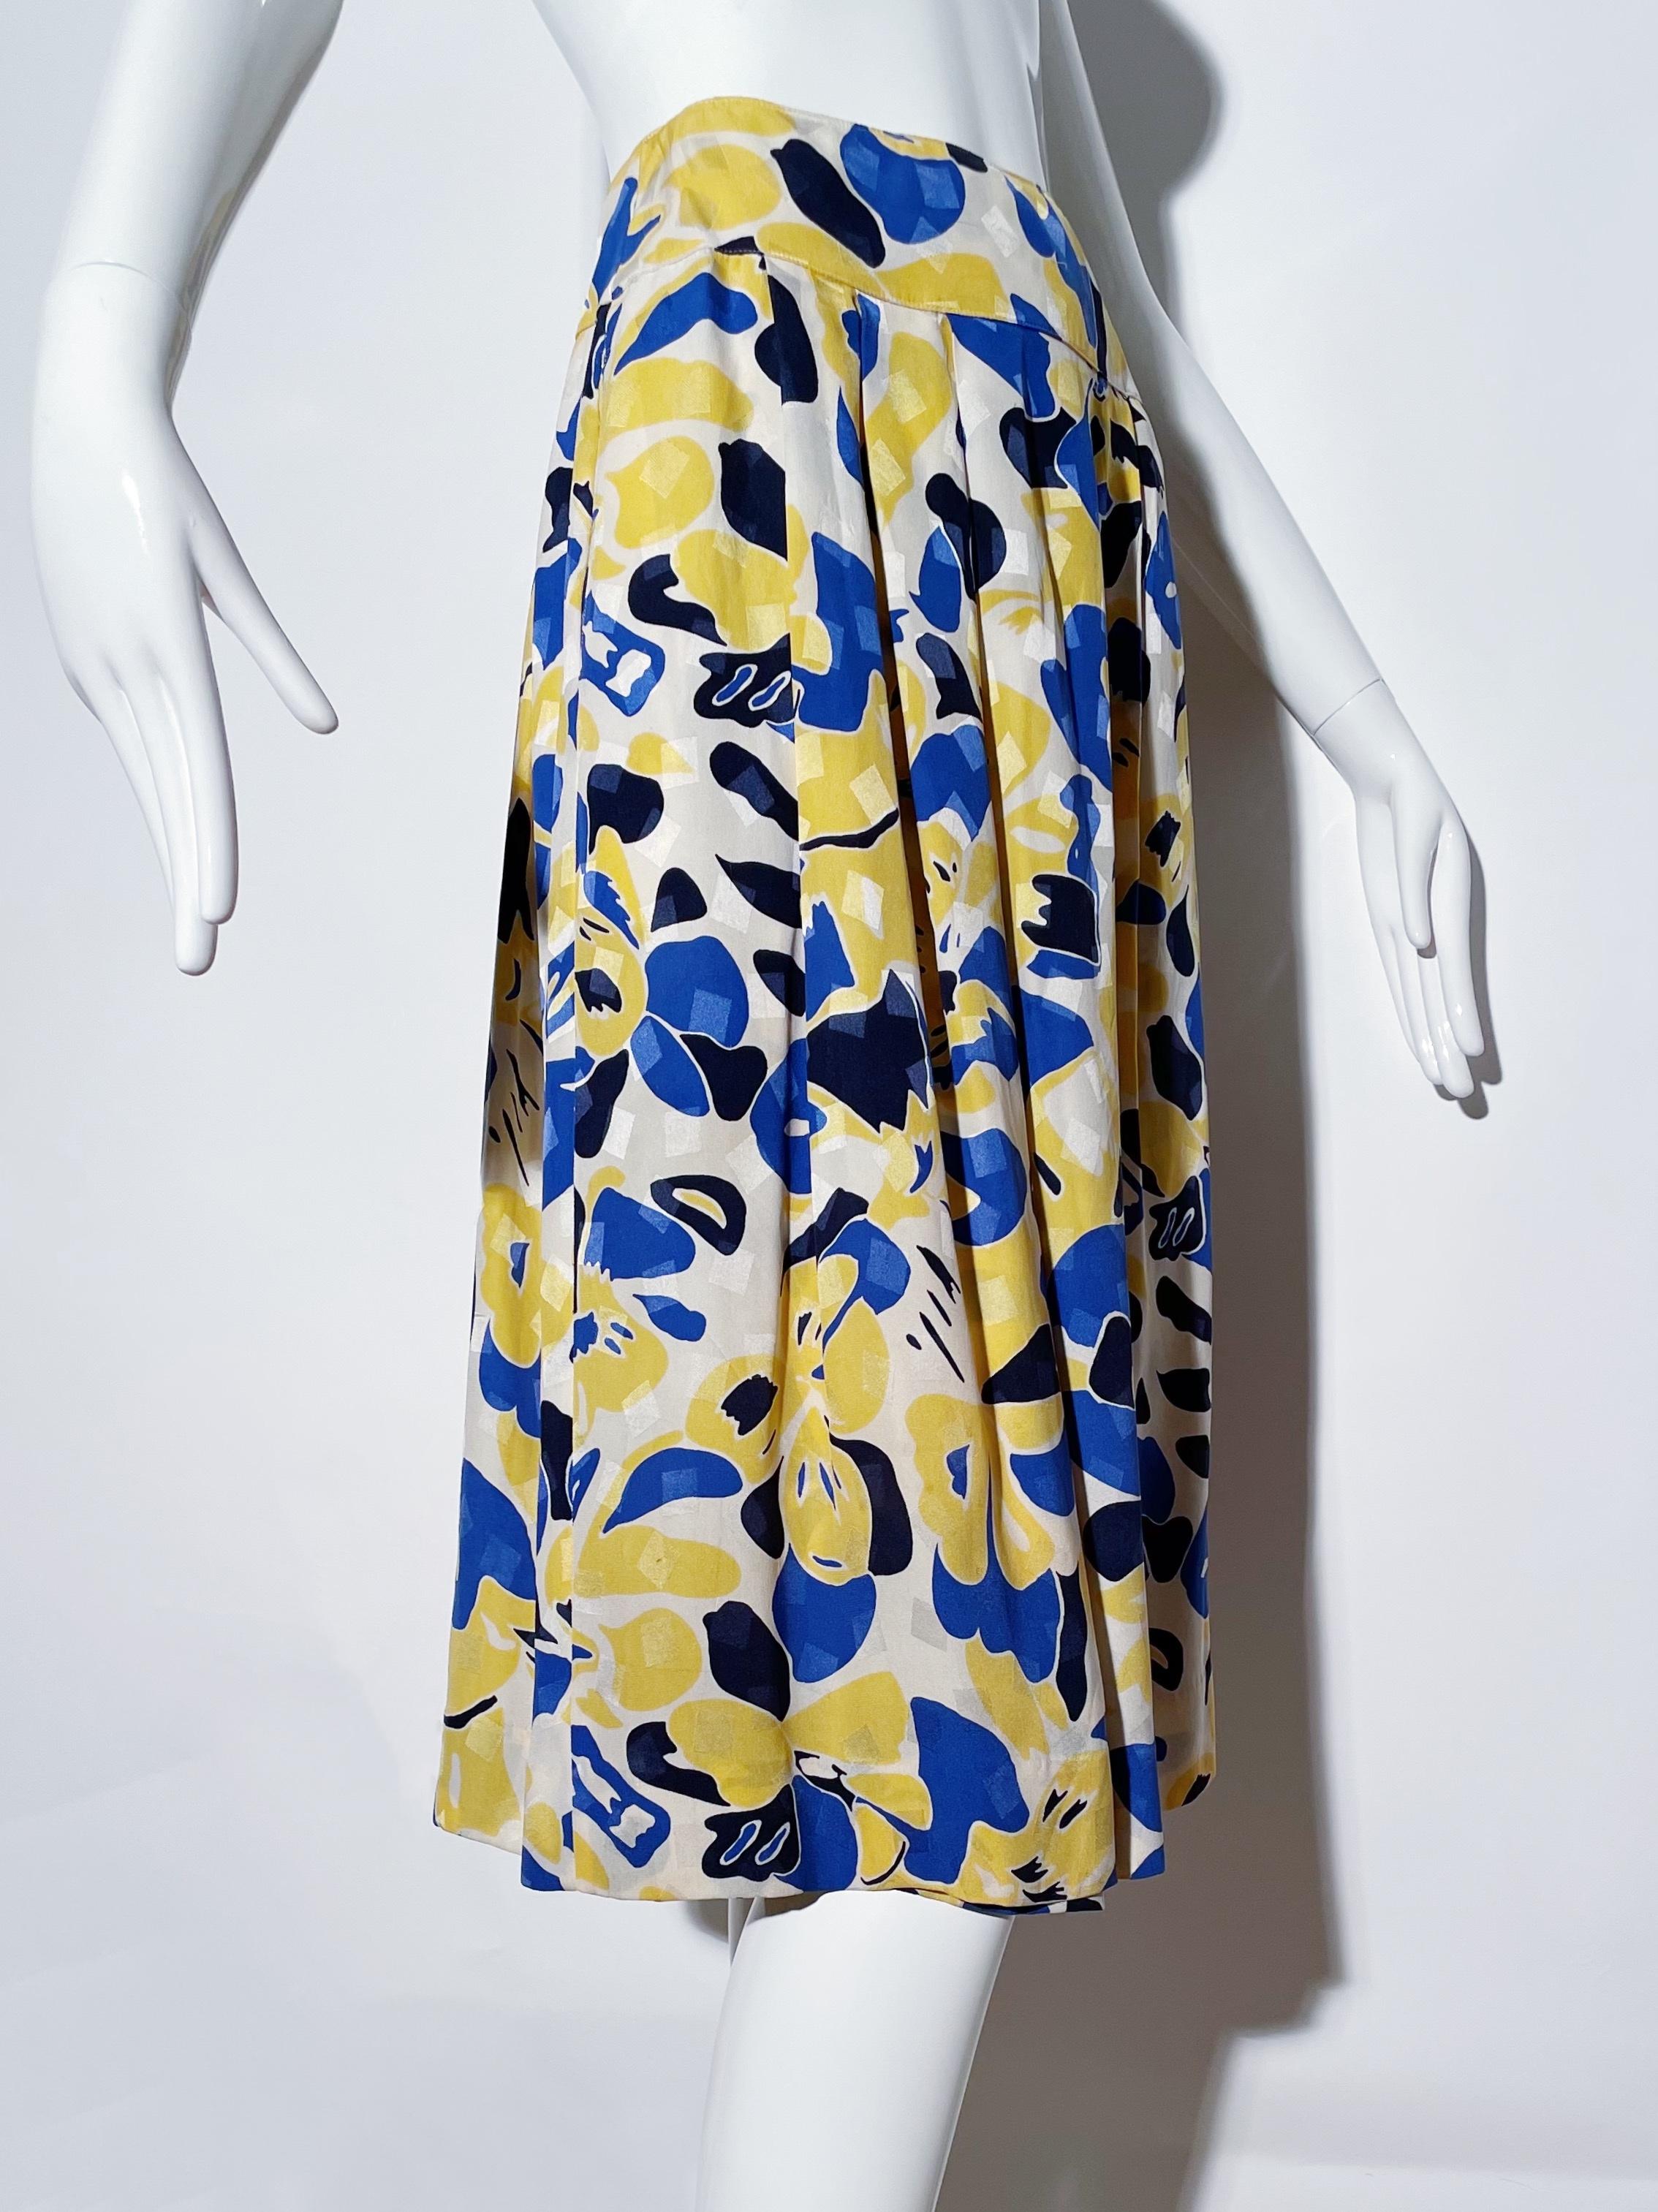 Christian Dior Floral Skirt  In Excellent Condition For Sale In Los Angeles, CA